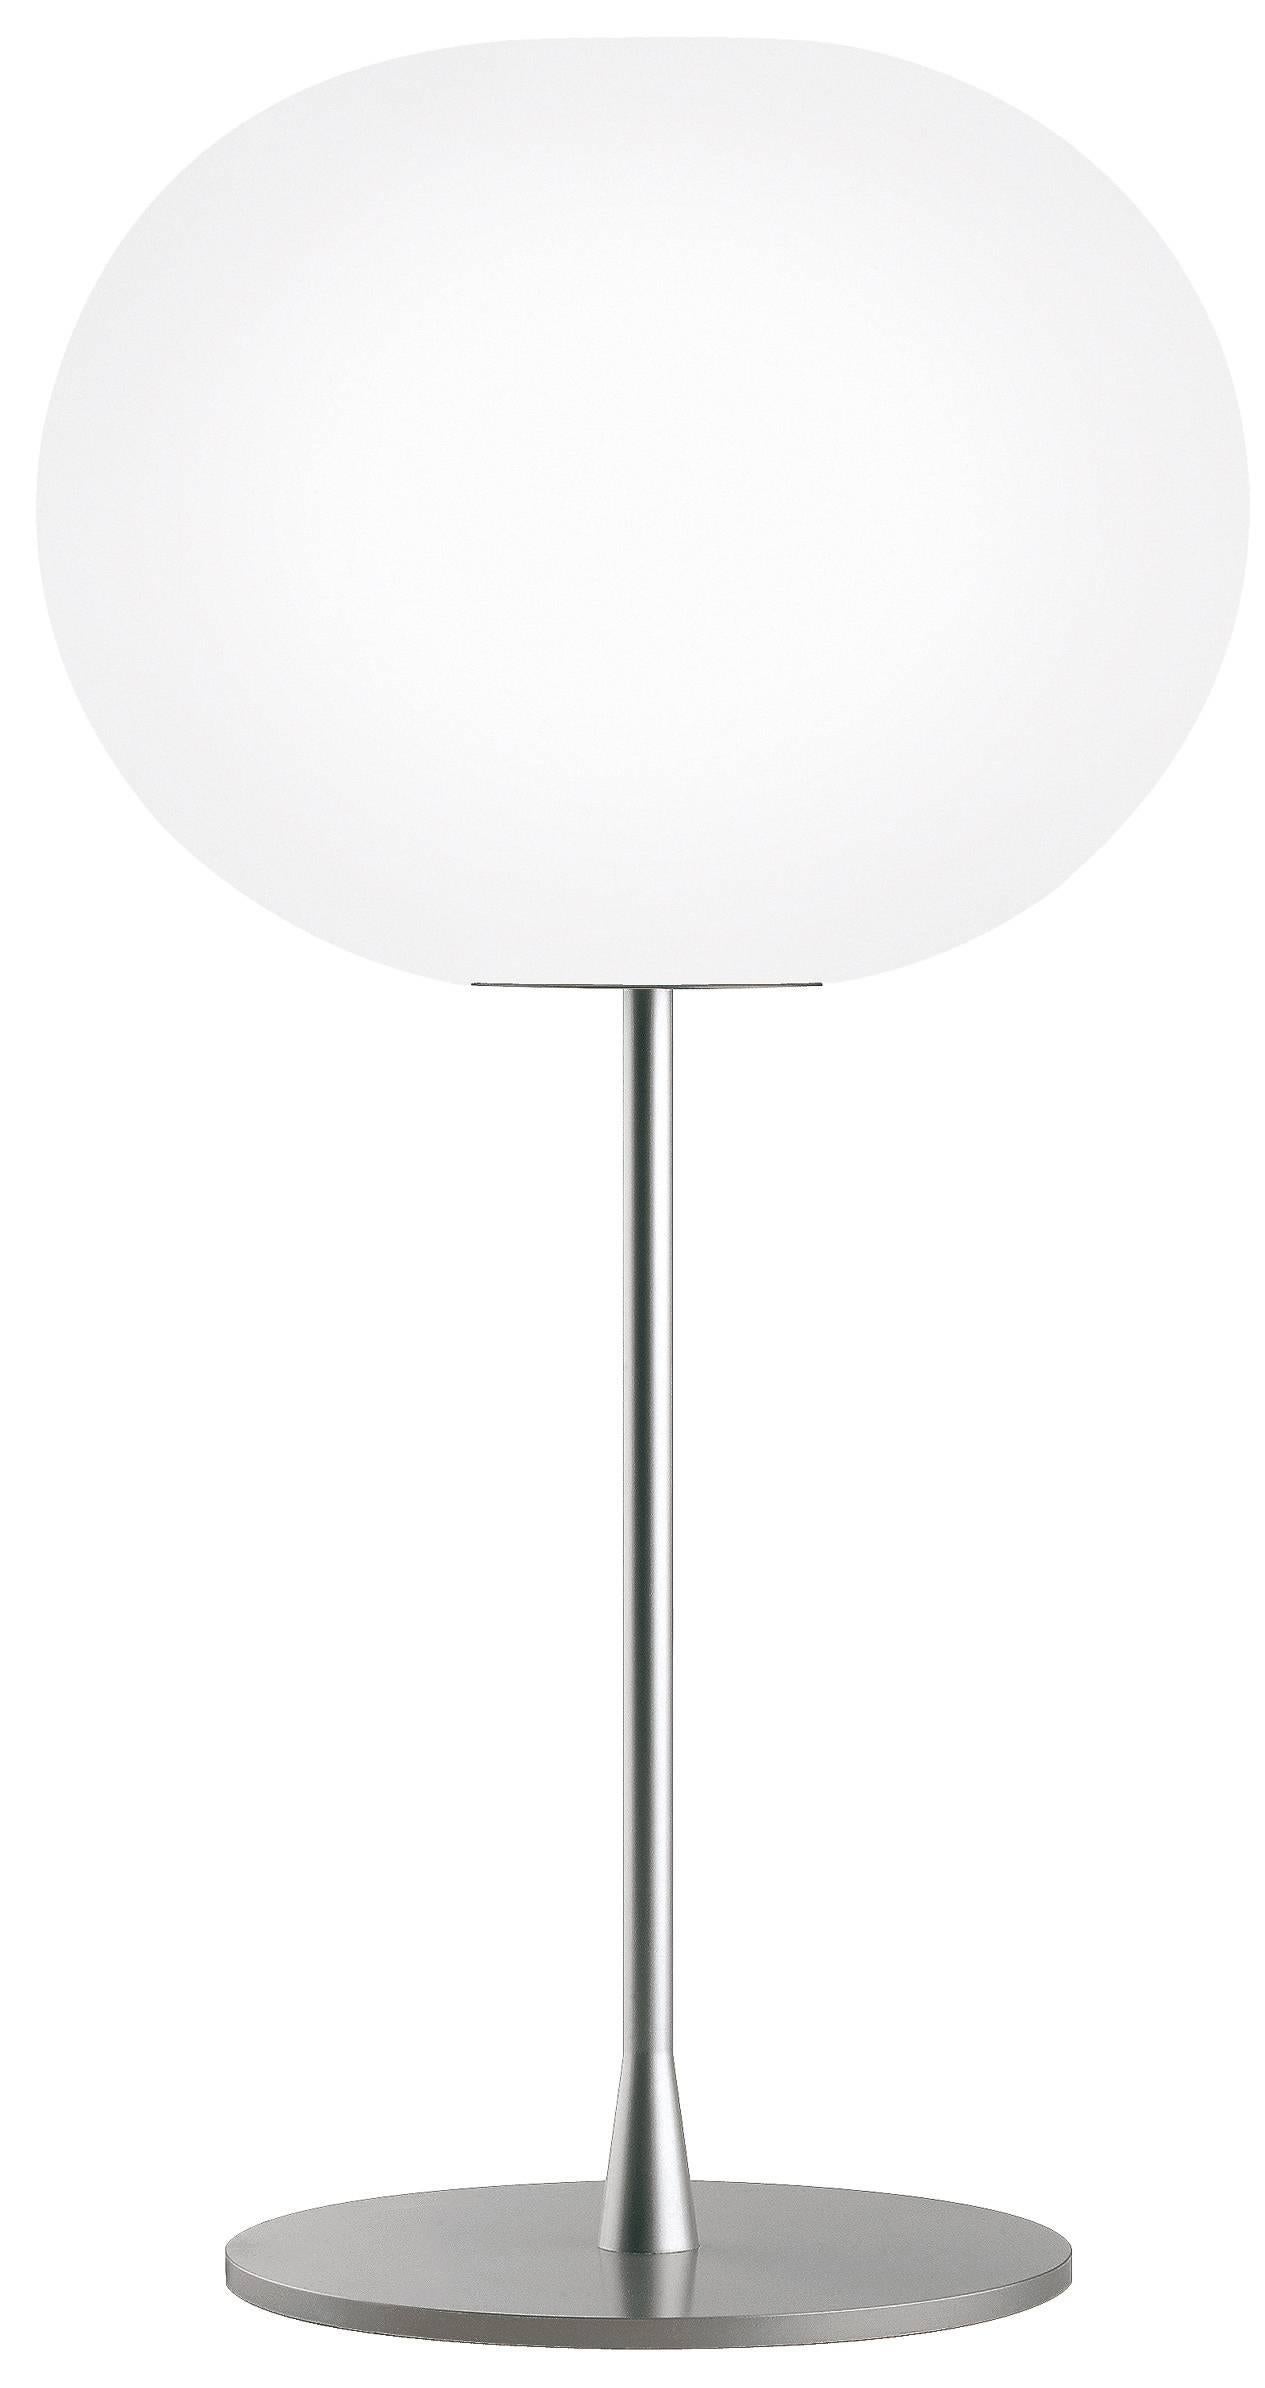 FLOS Glo-Ball T2 Halogen Table Lamp by Jasper Morrison
Part of the popular Glo Ball Series, the Glo Ball Basic was created in 1998 by artist Jasper Morrison to invoke the radiant calm of a full moon. This unique table lamp has a white acid-etched